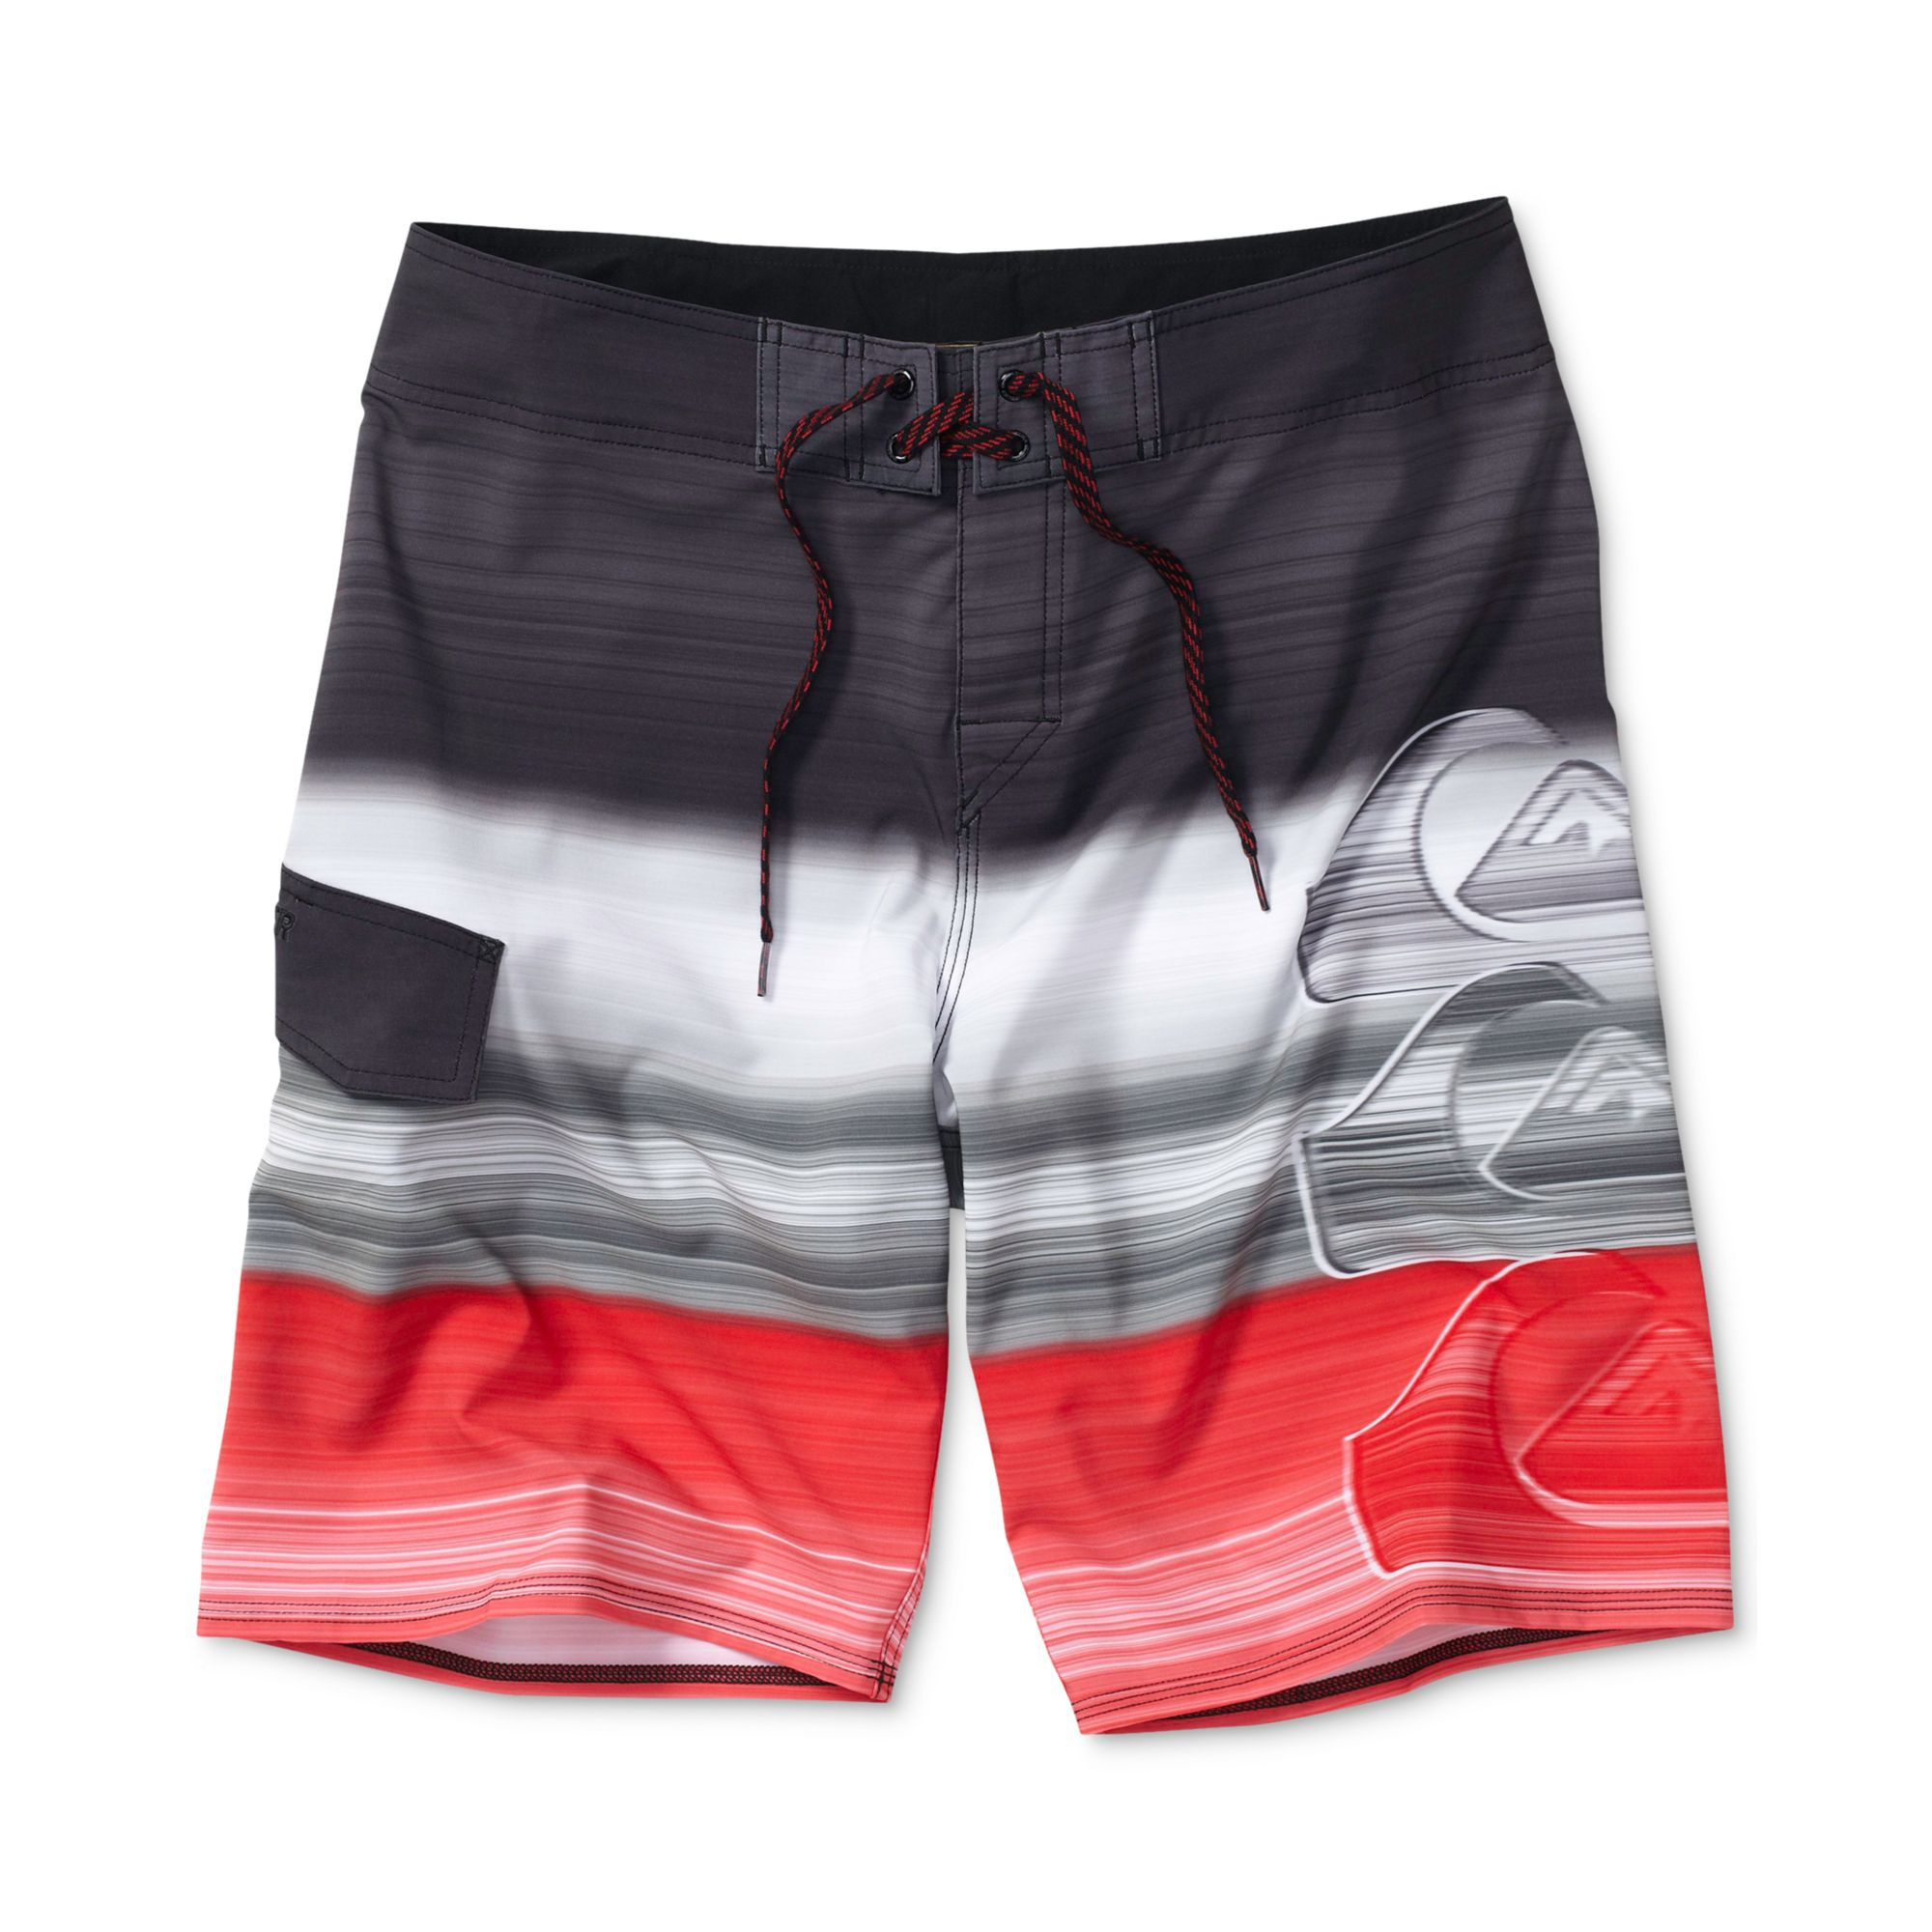 Quiksilver Hilo Boardshorts in Red for Men - Lyst
 Quiksilver Shorts Red